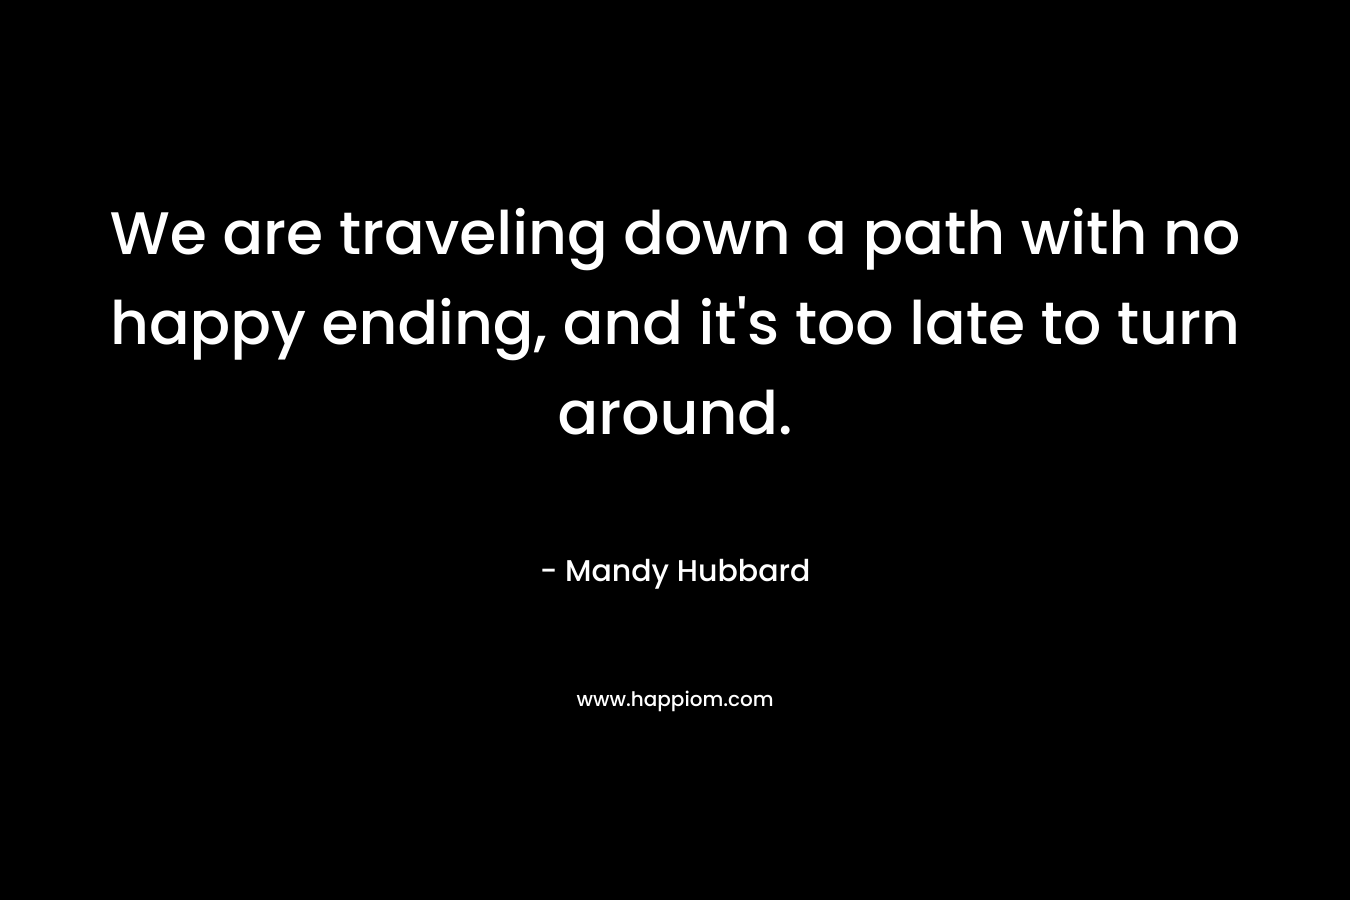 We are traveling down a path with no happy ending, and it's too late to turn around.